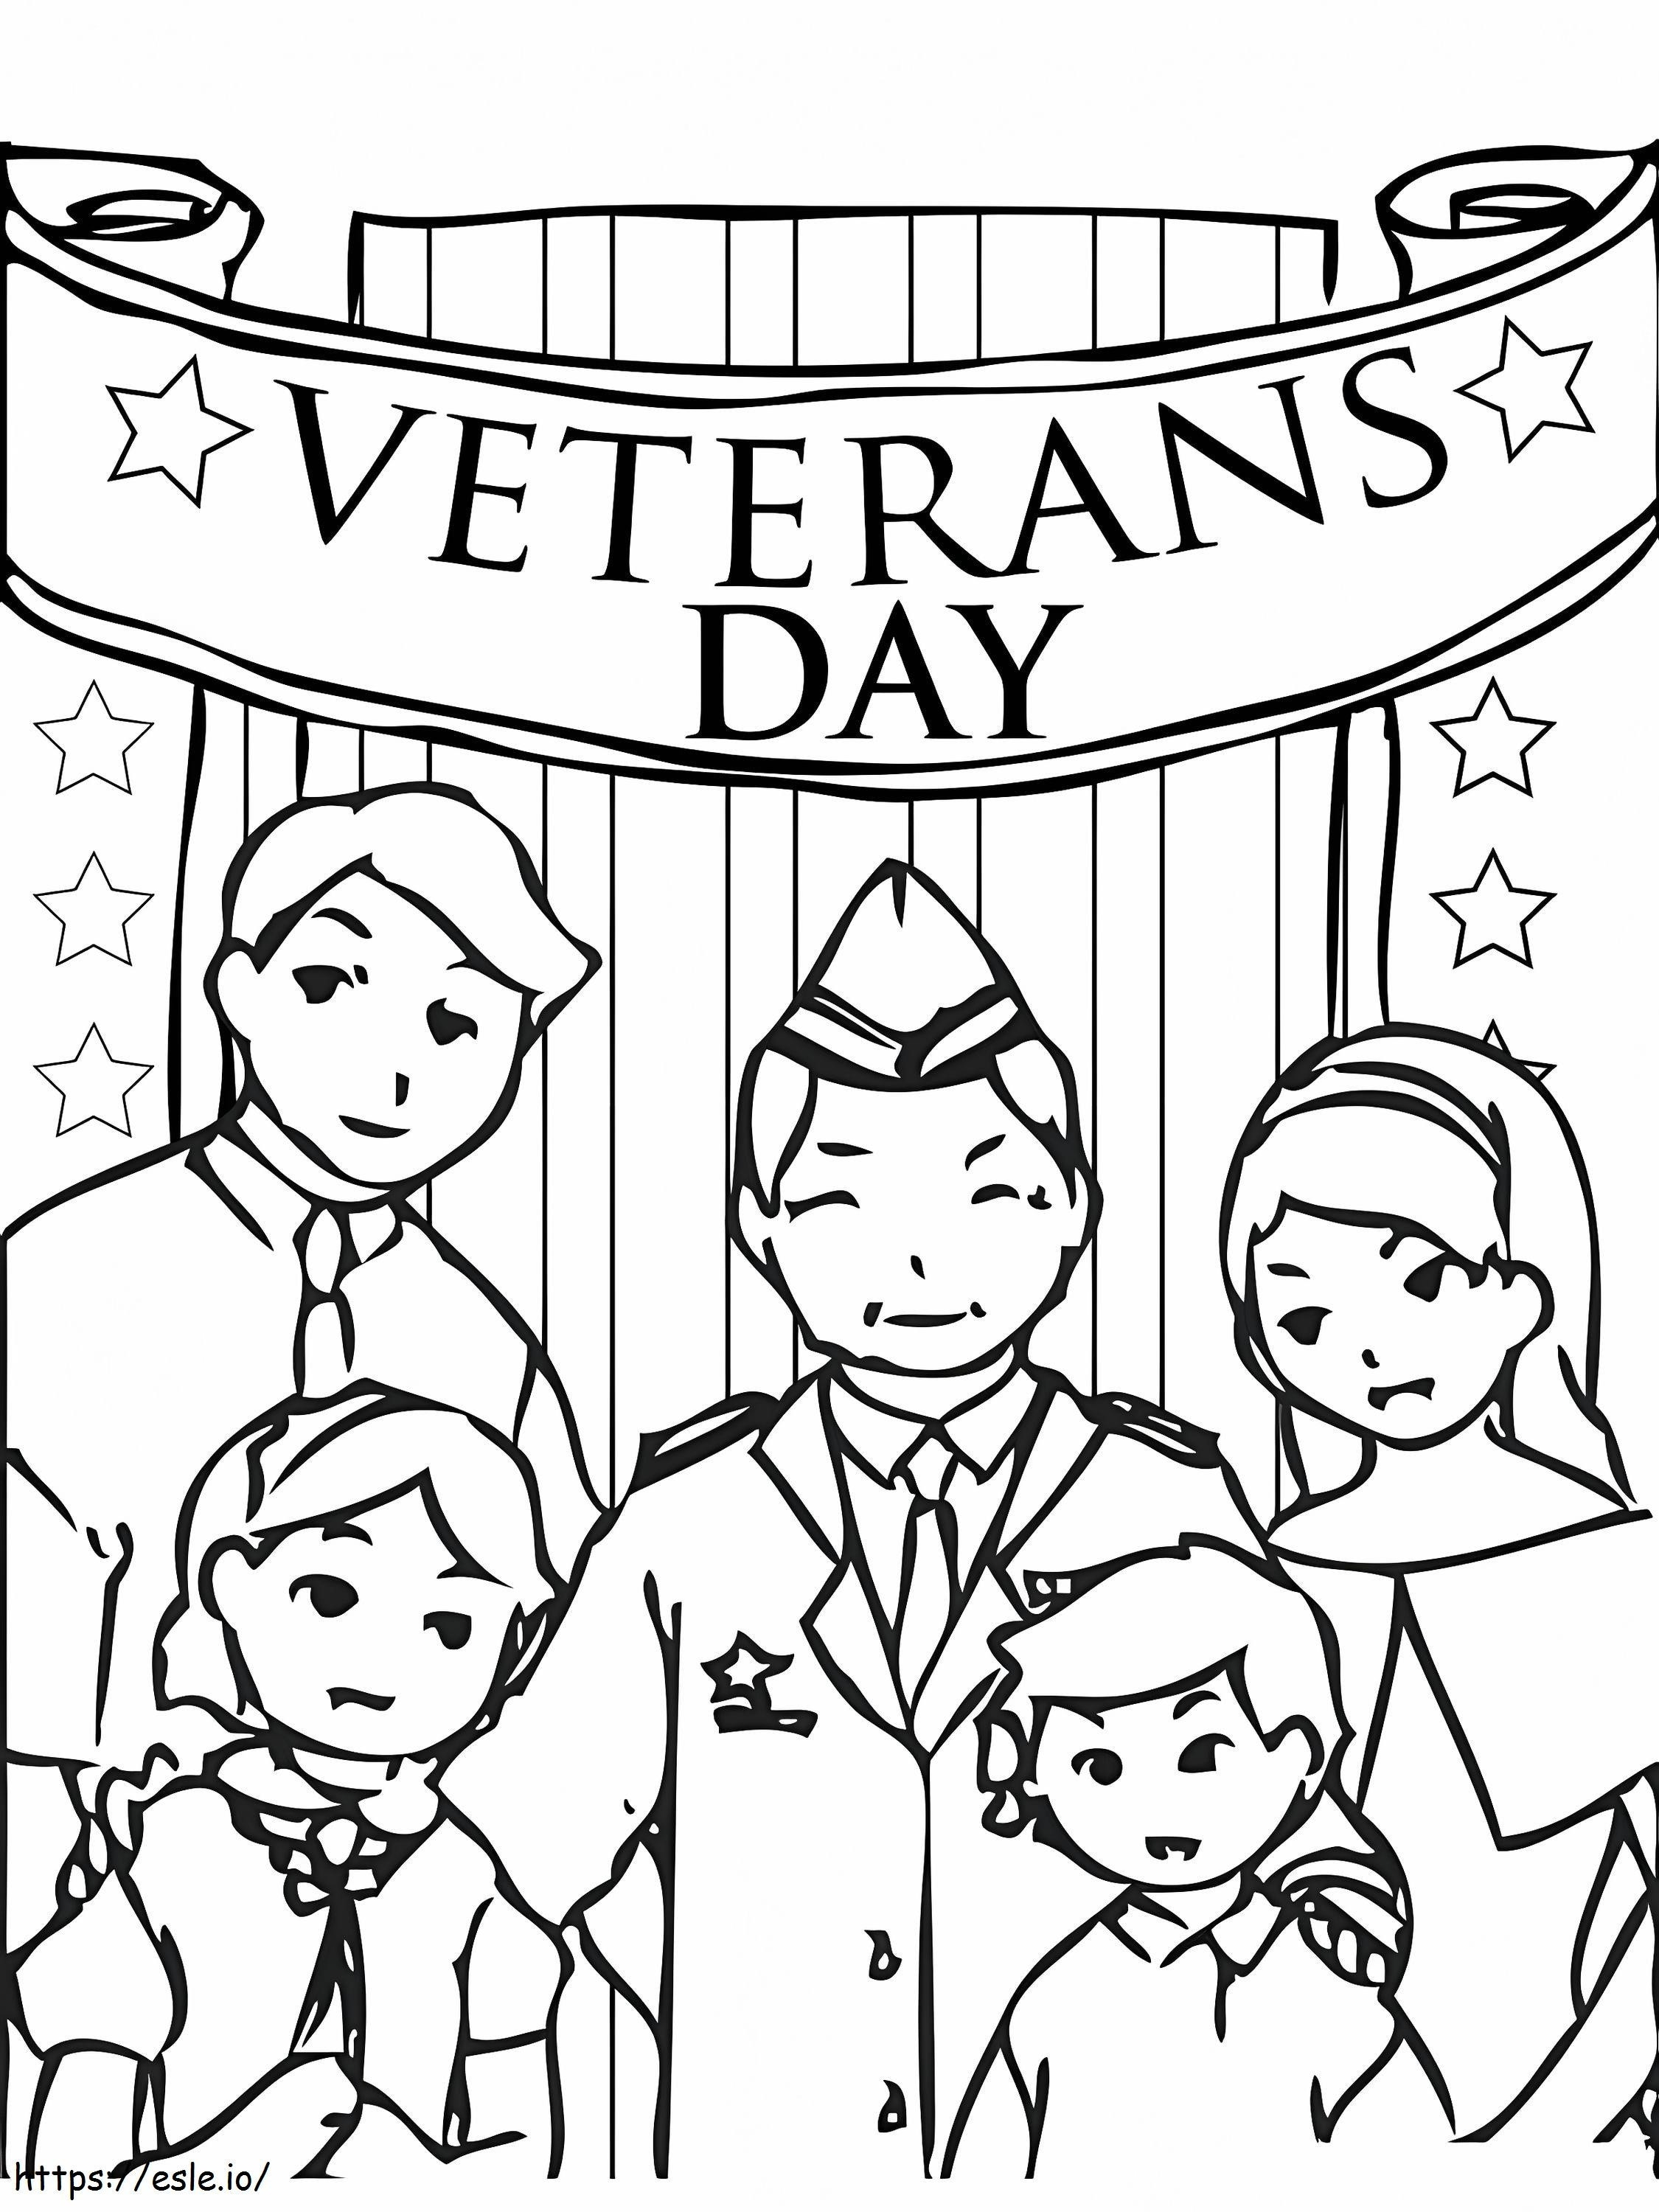 Veterans Day 2 coloring page